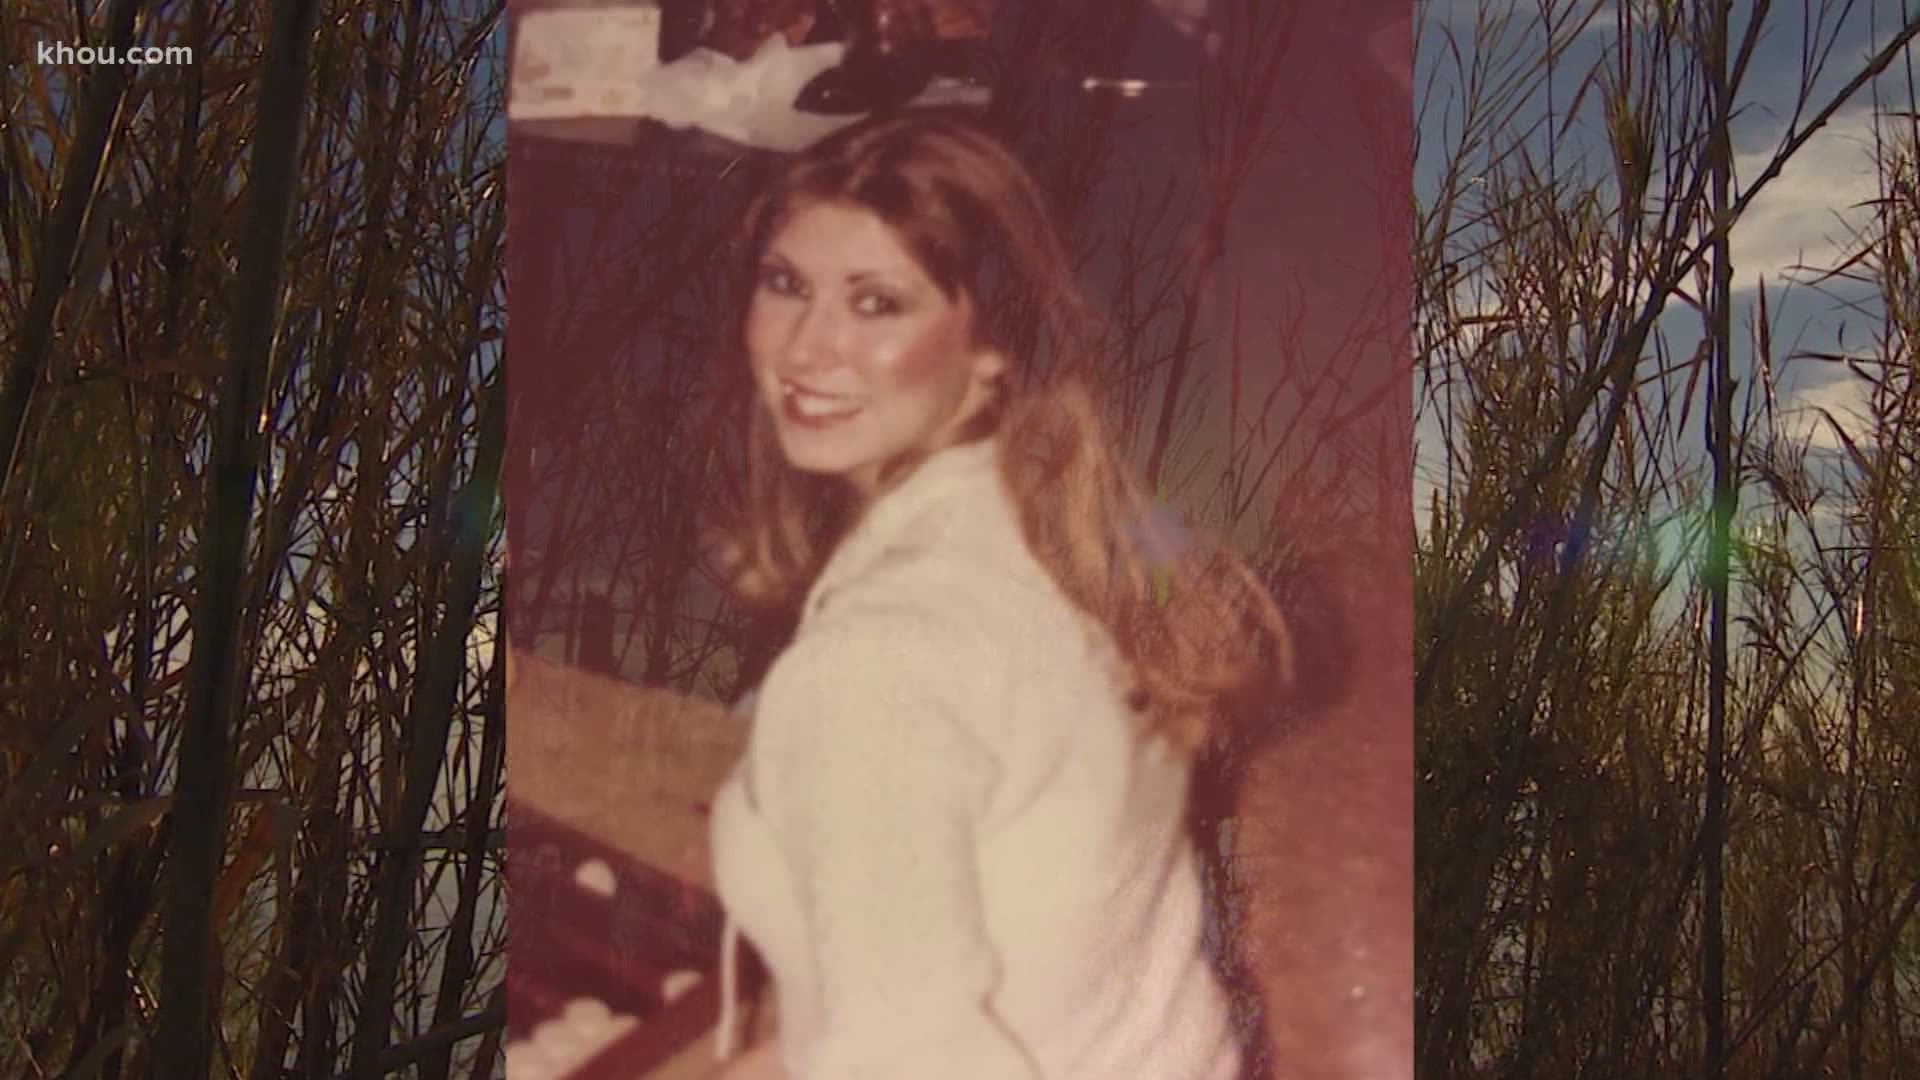 A new podcast out October 5 dives into how a Houston-area cold case was cracked using forensic genealogy. It features the 1983 Seabrook murder of Susan Eads.